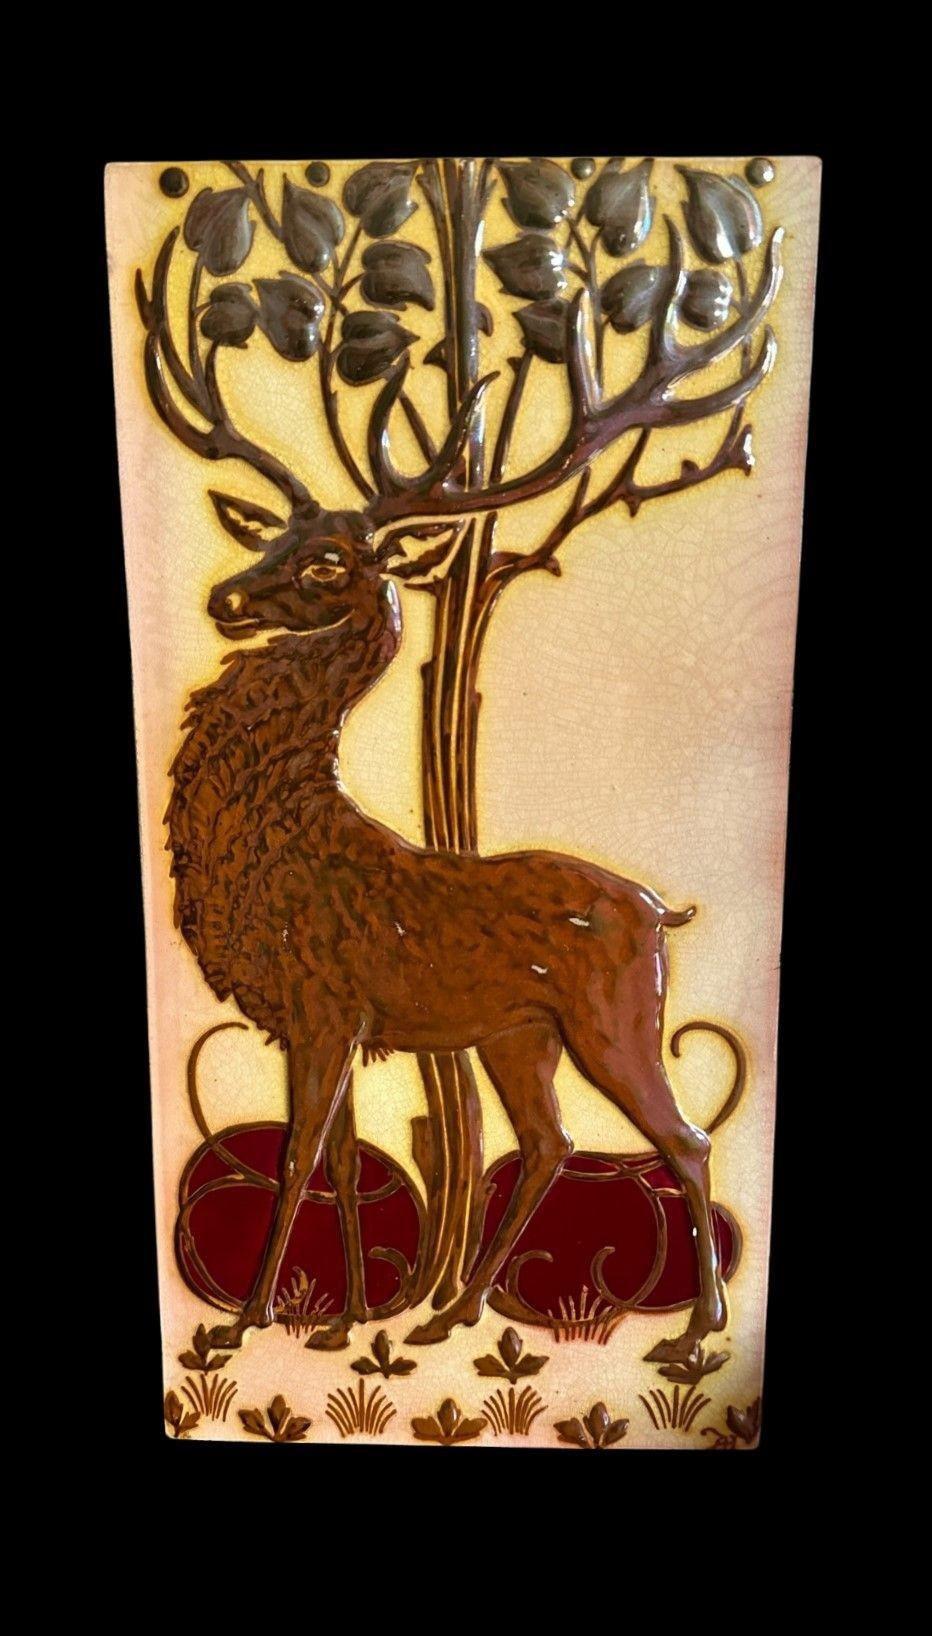 5447
Rare Pilkingtons Royal Lancastrian Lustre Tile decorated in relief with a Stag and Tudor Roses by Albert Hall (son of Lawrence Hall).
Circa 1908
42.5cm x 21cm
Monogram to bottom right corner
The same design illustrated on Page 33 of Cross’s